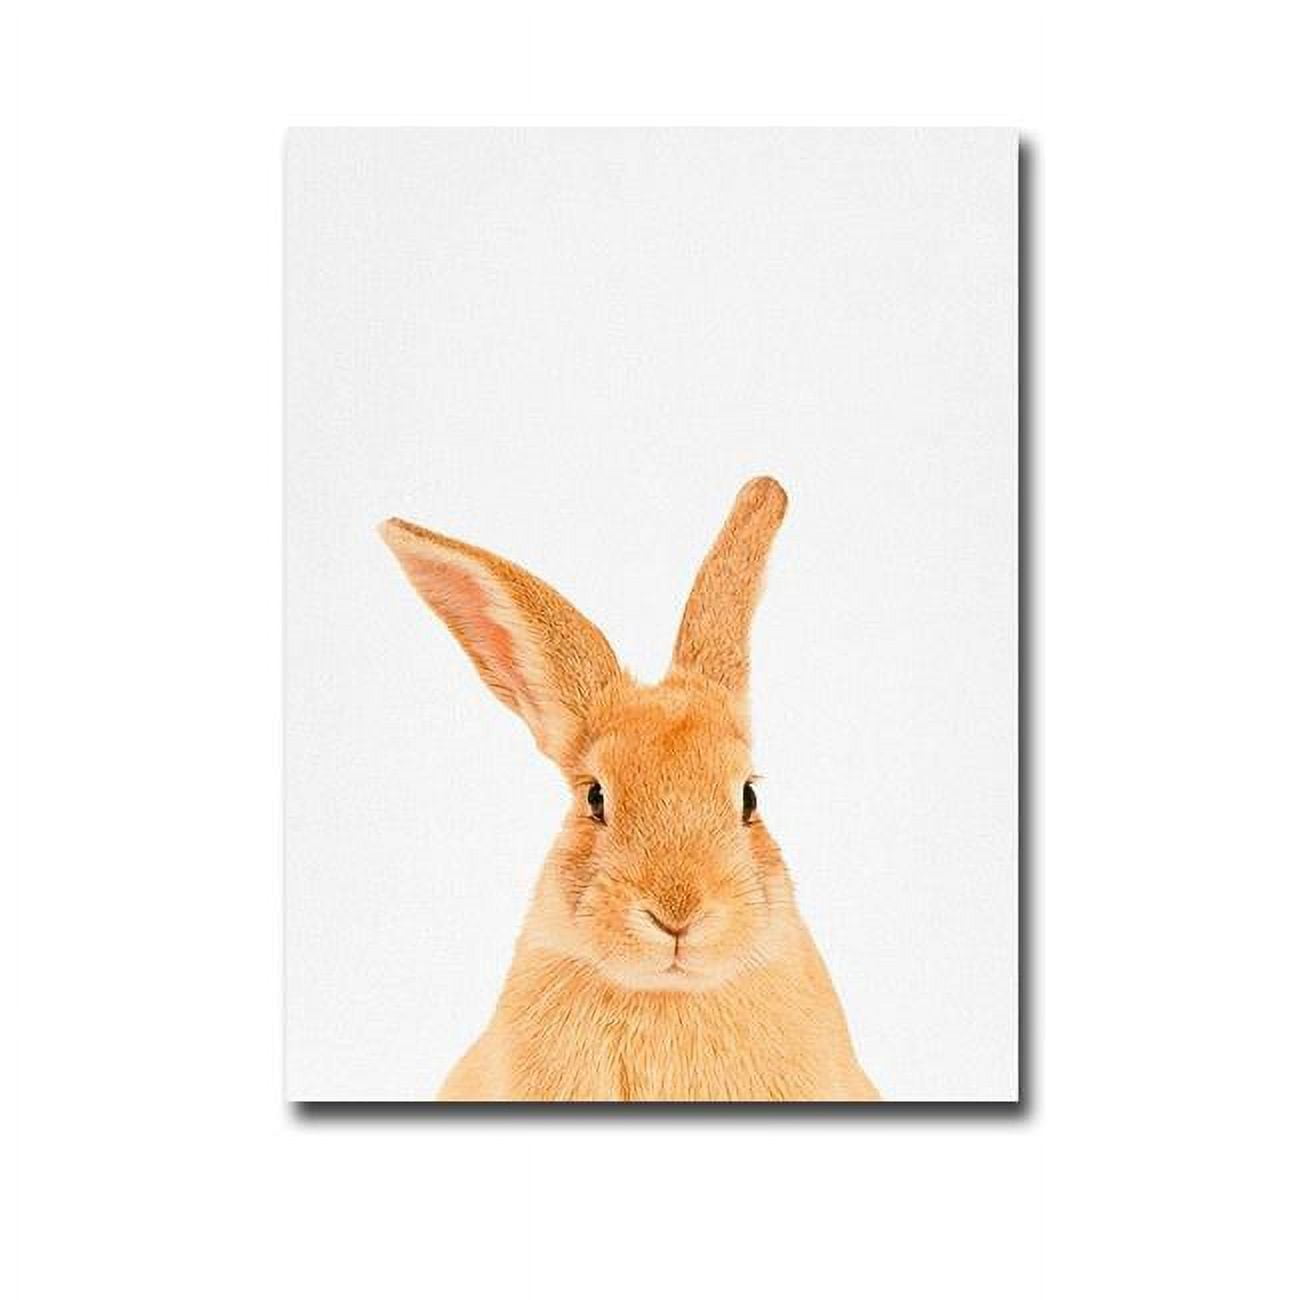 1216u296ig Rabbit By Tai Prints Premium Gallery-wrapped Canvas Giclee Art - 12 X 16 X 1.5 In.